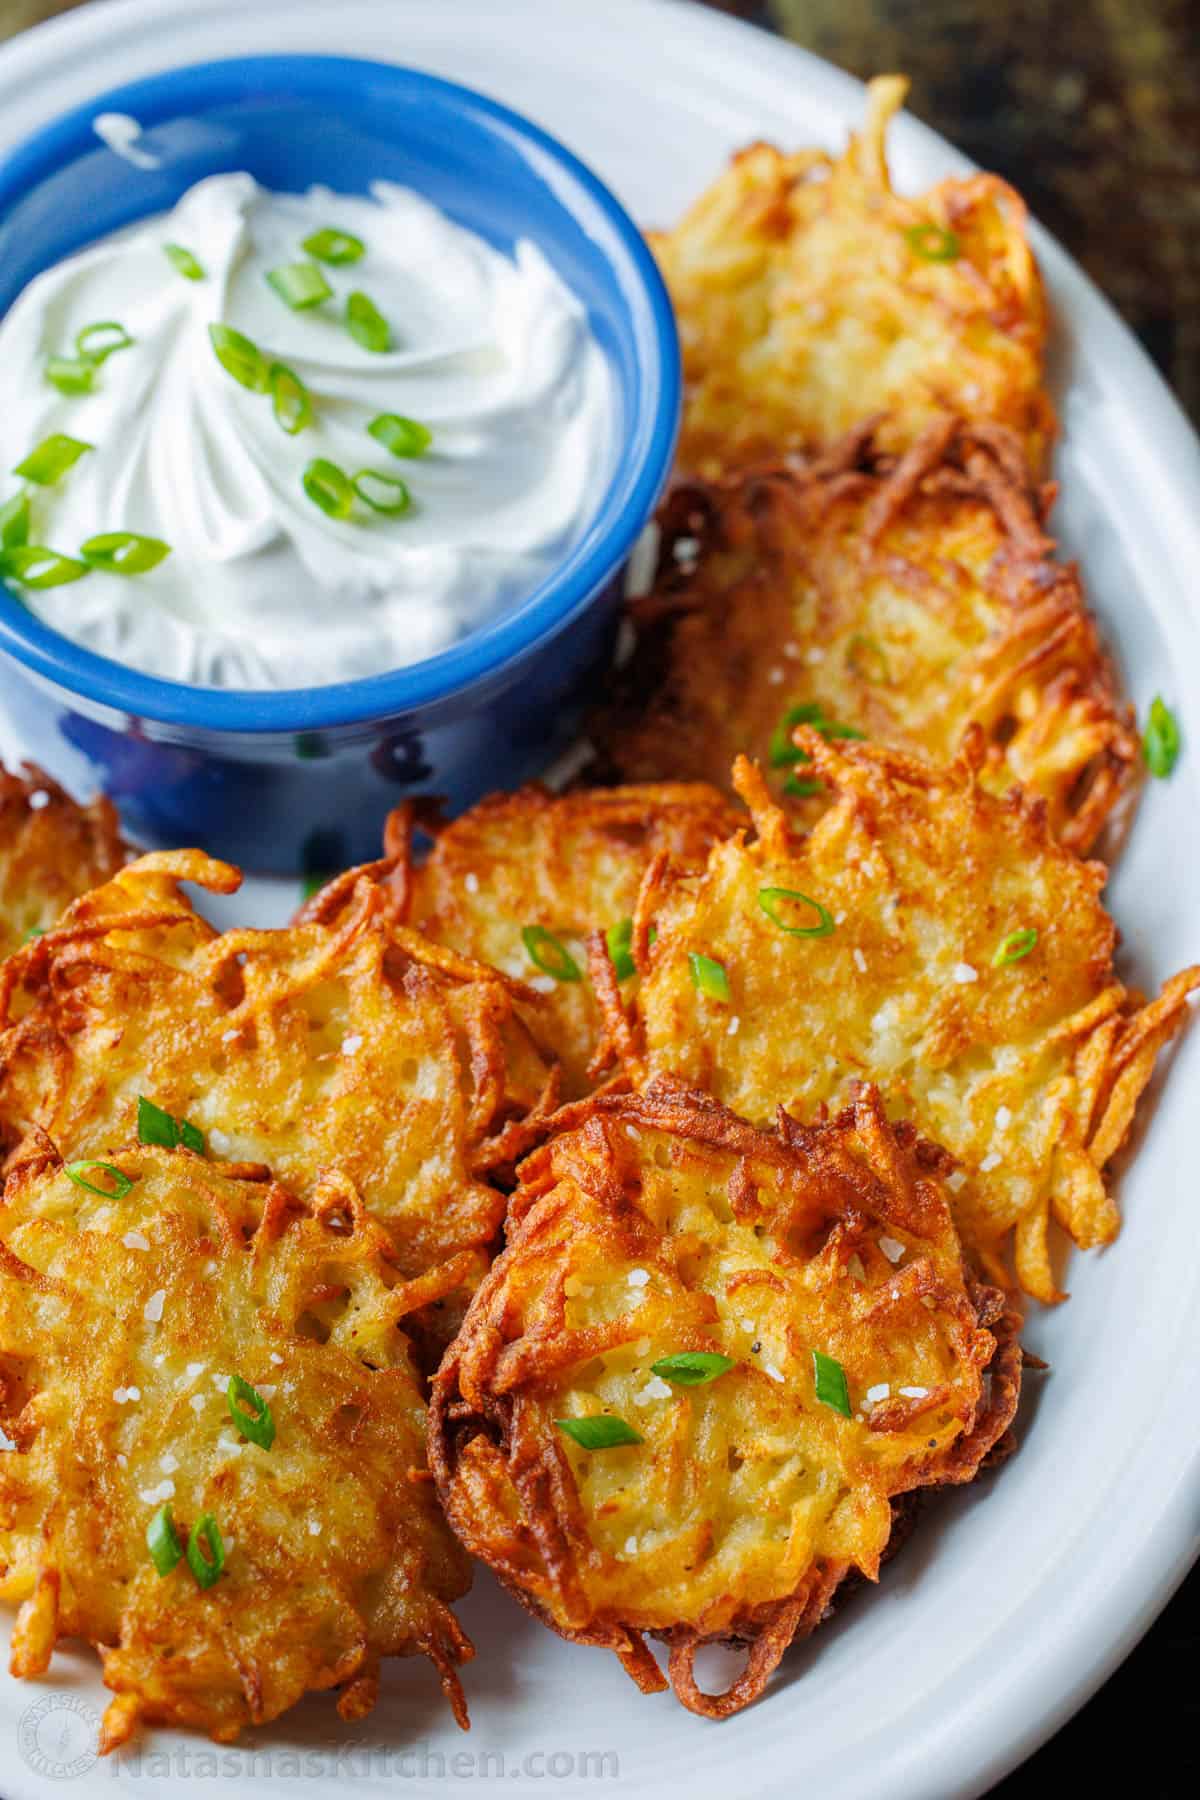 Latkes fried and topped with chives. On a plate with sour cream